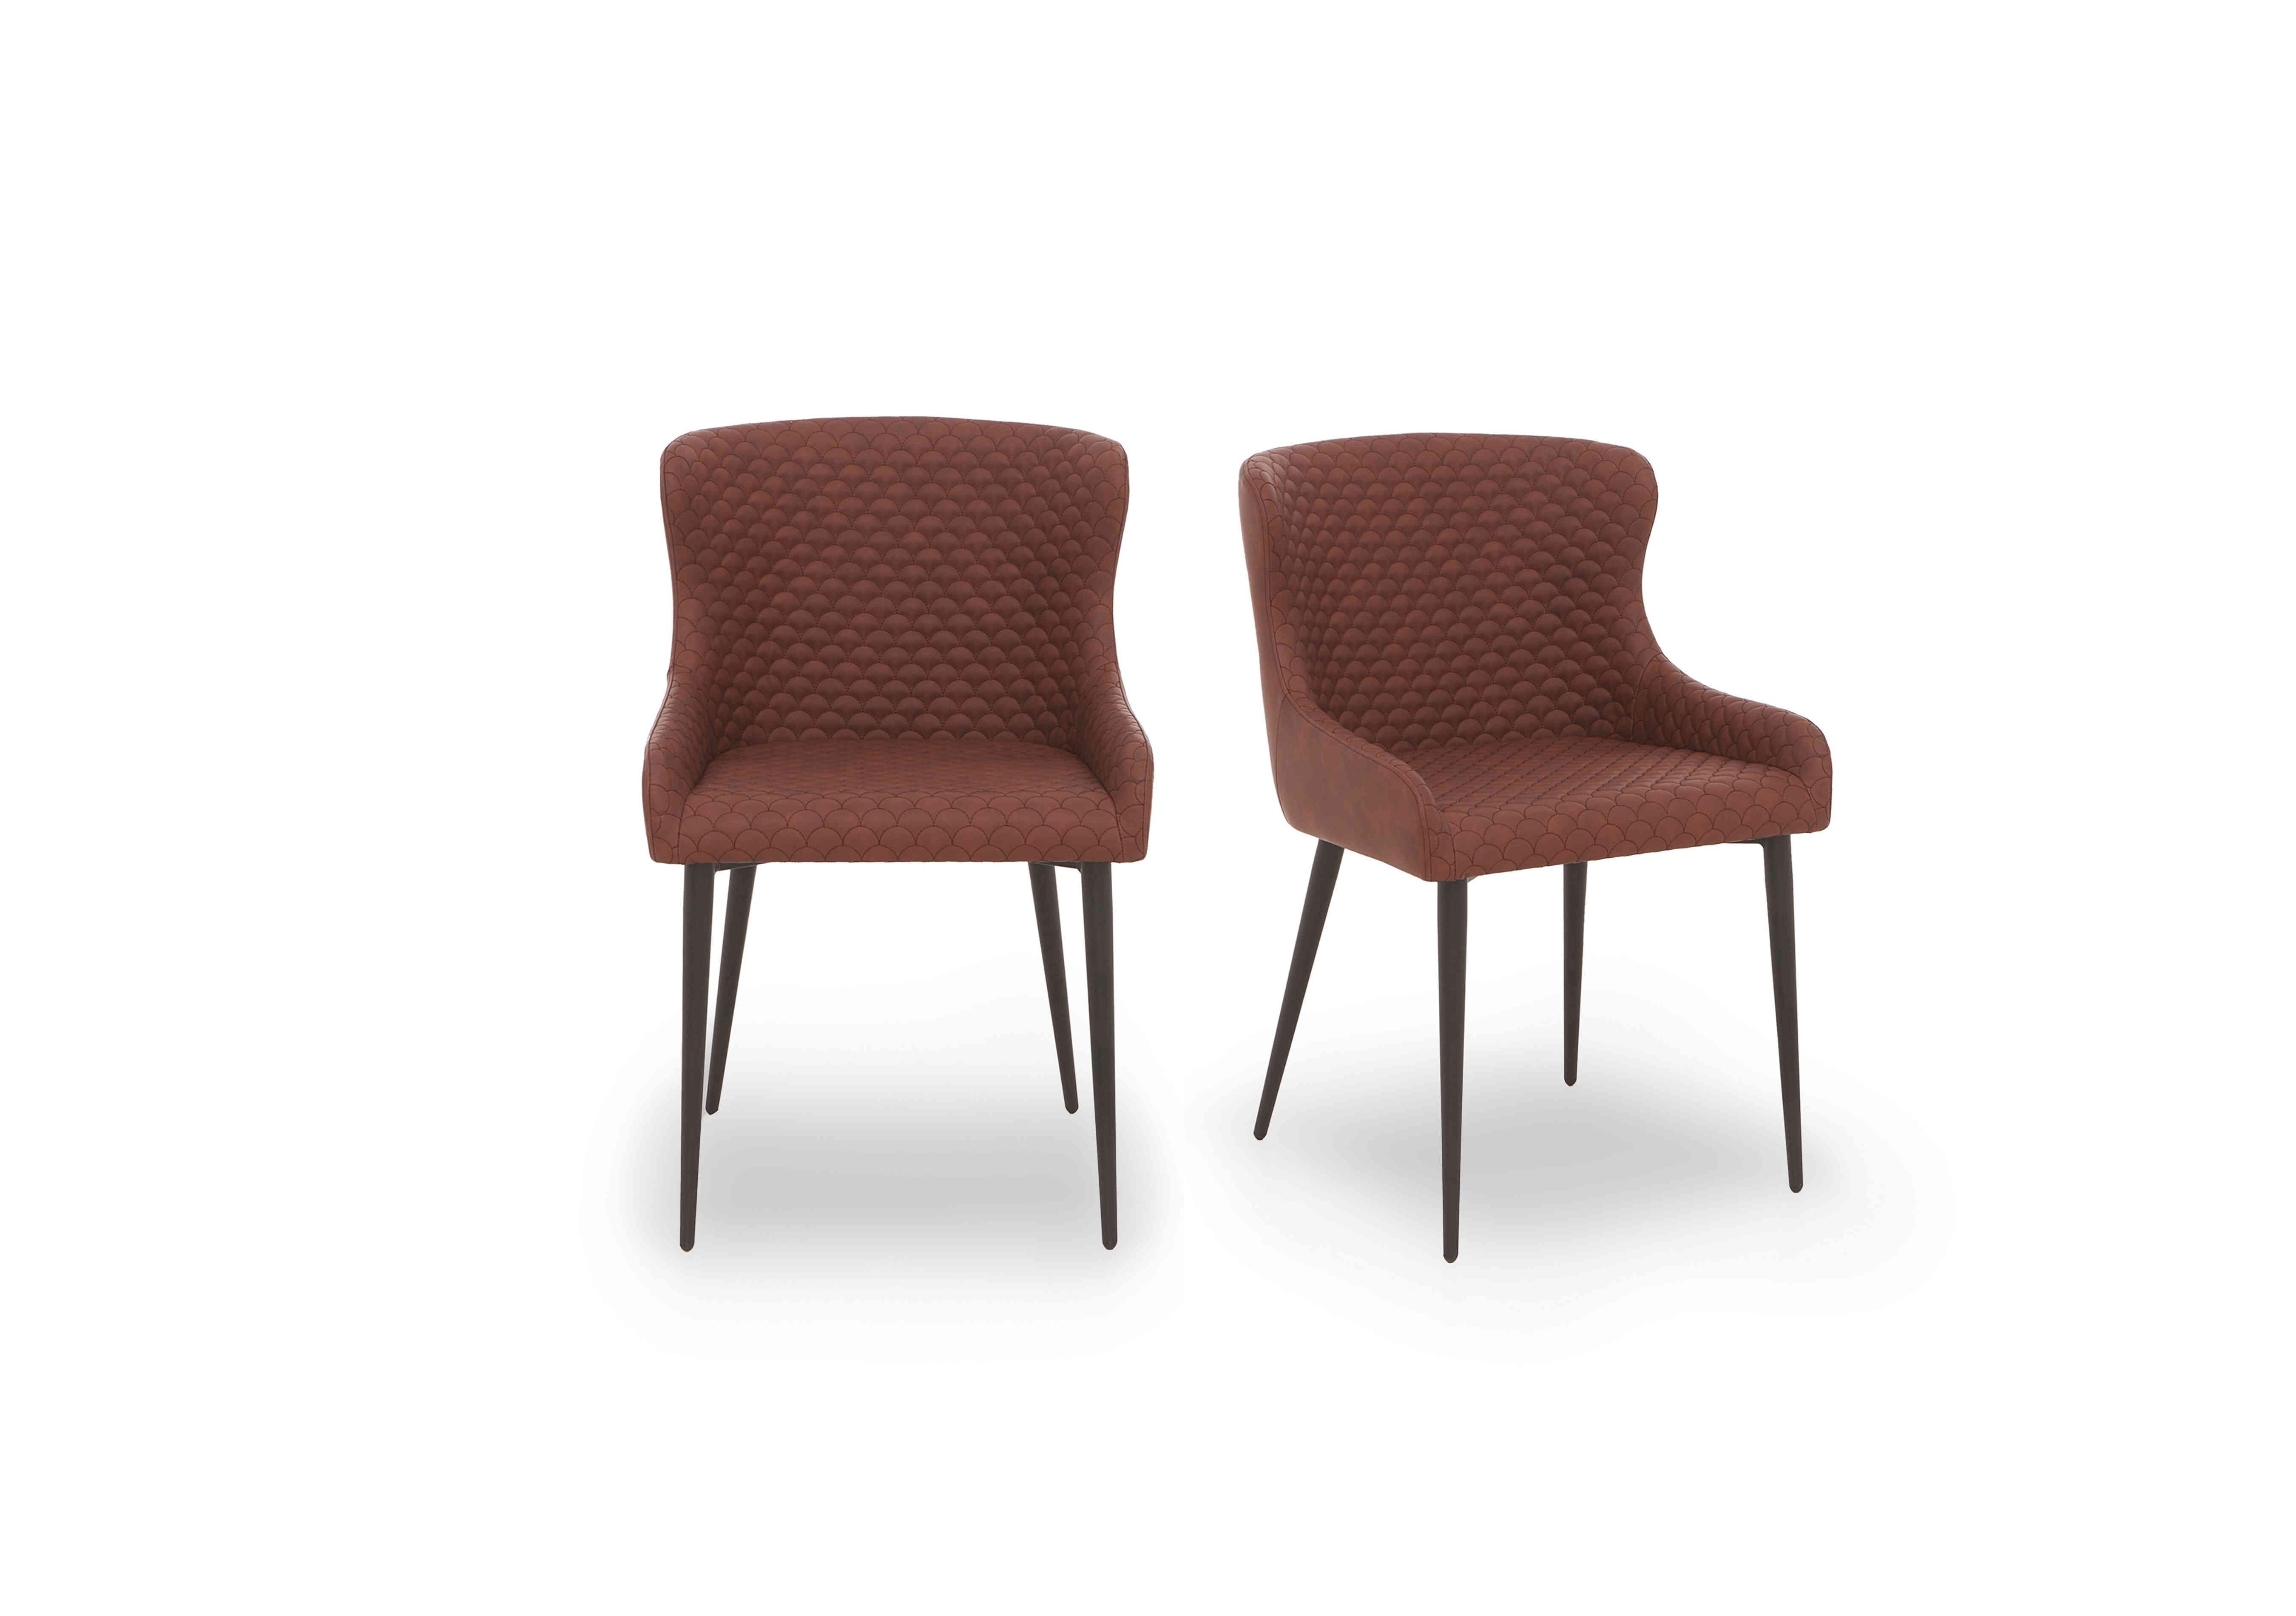 Hanoi Pair of Faux Leather Dining Chairs in Tan on Furniture Village